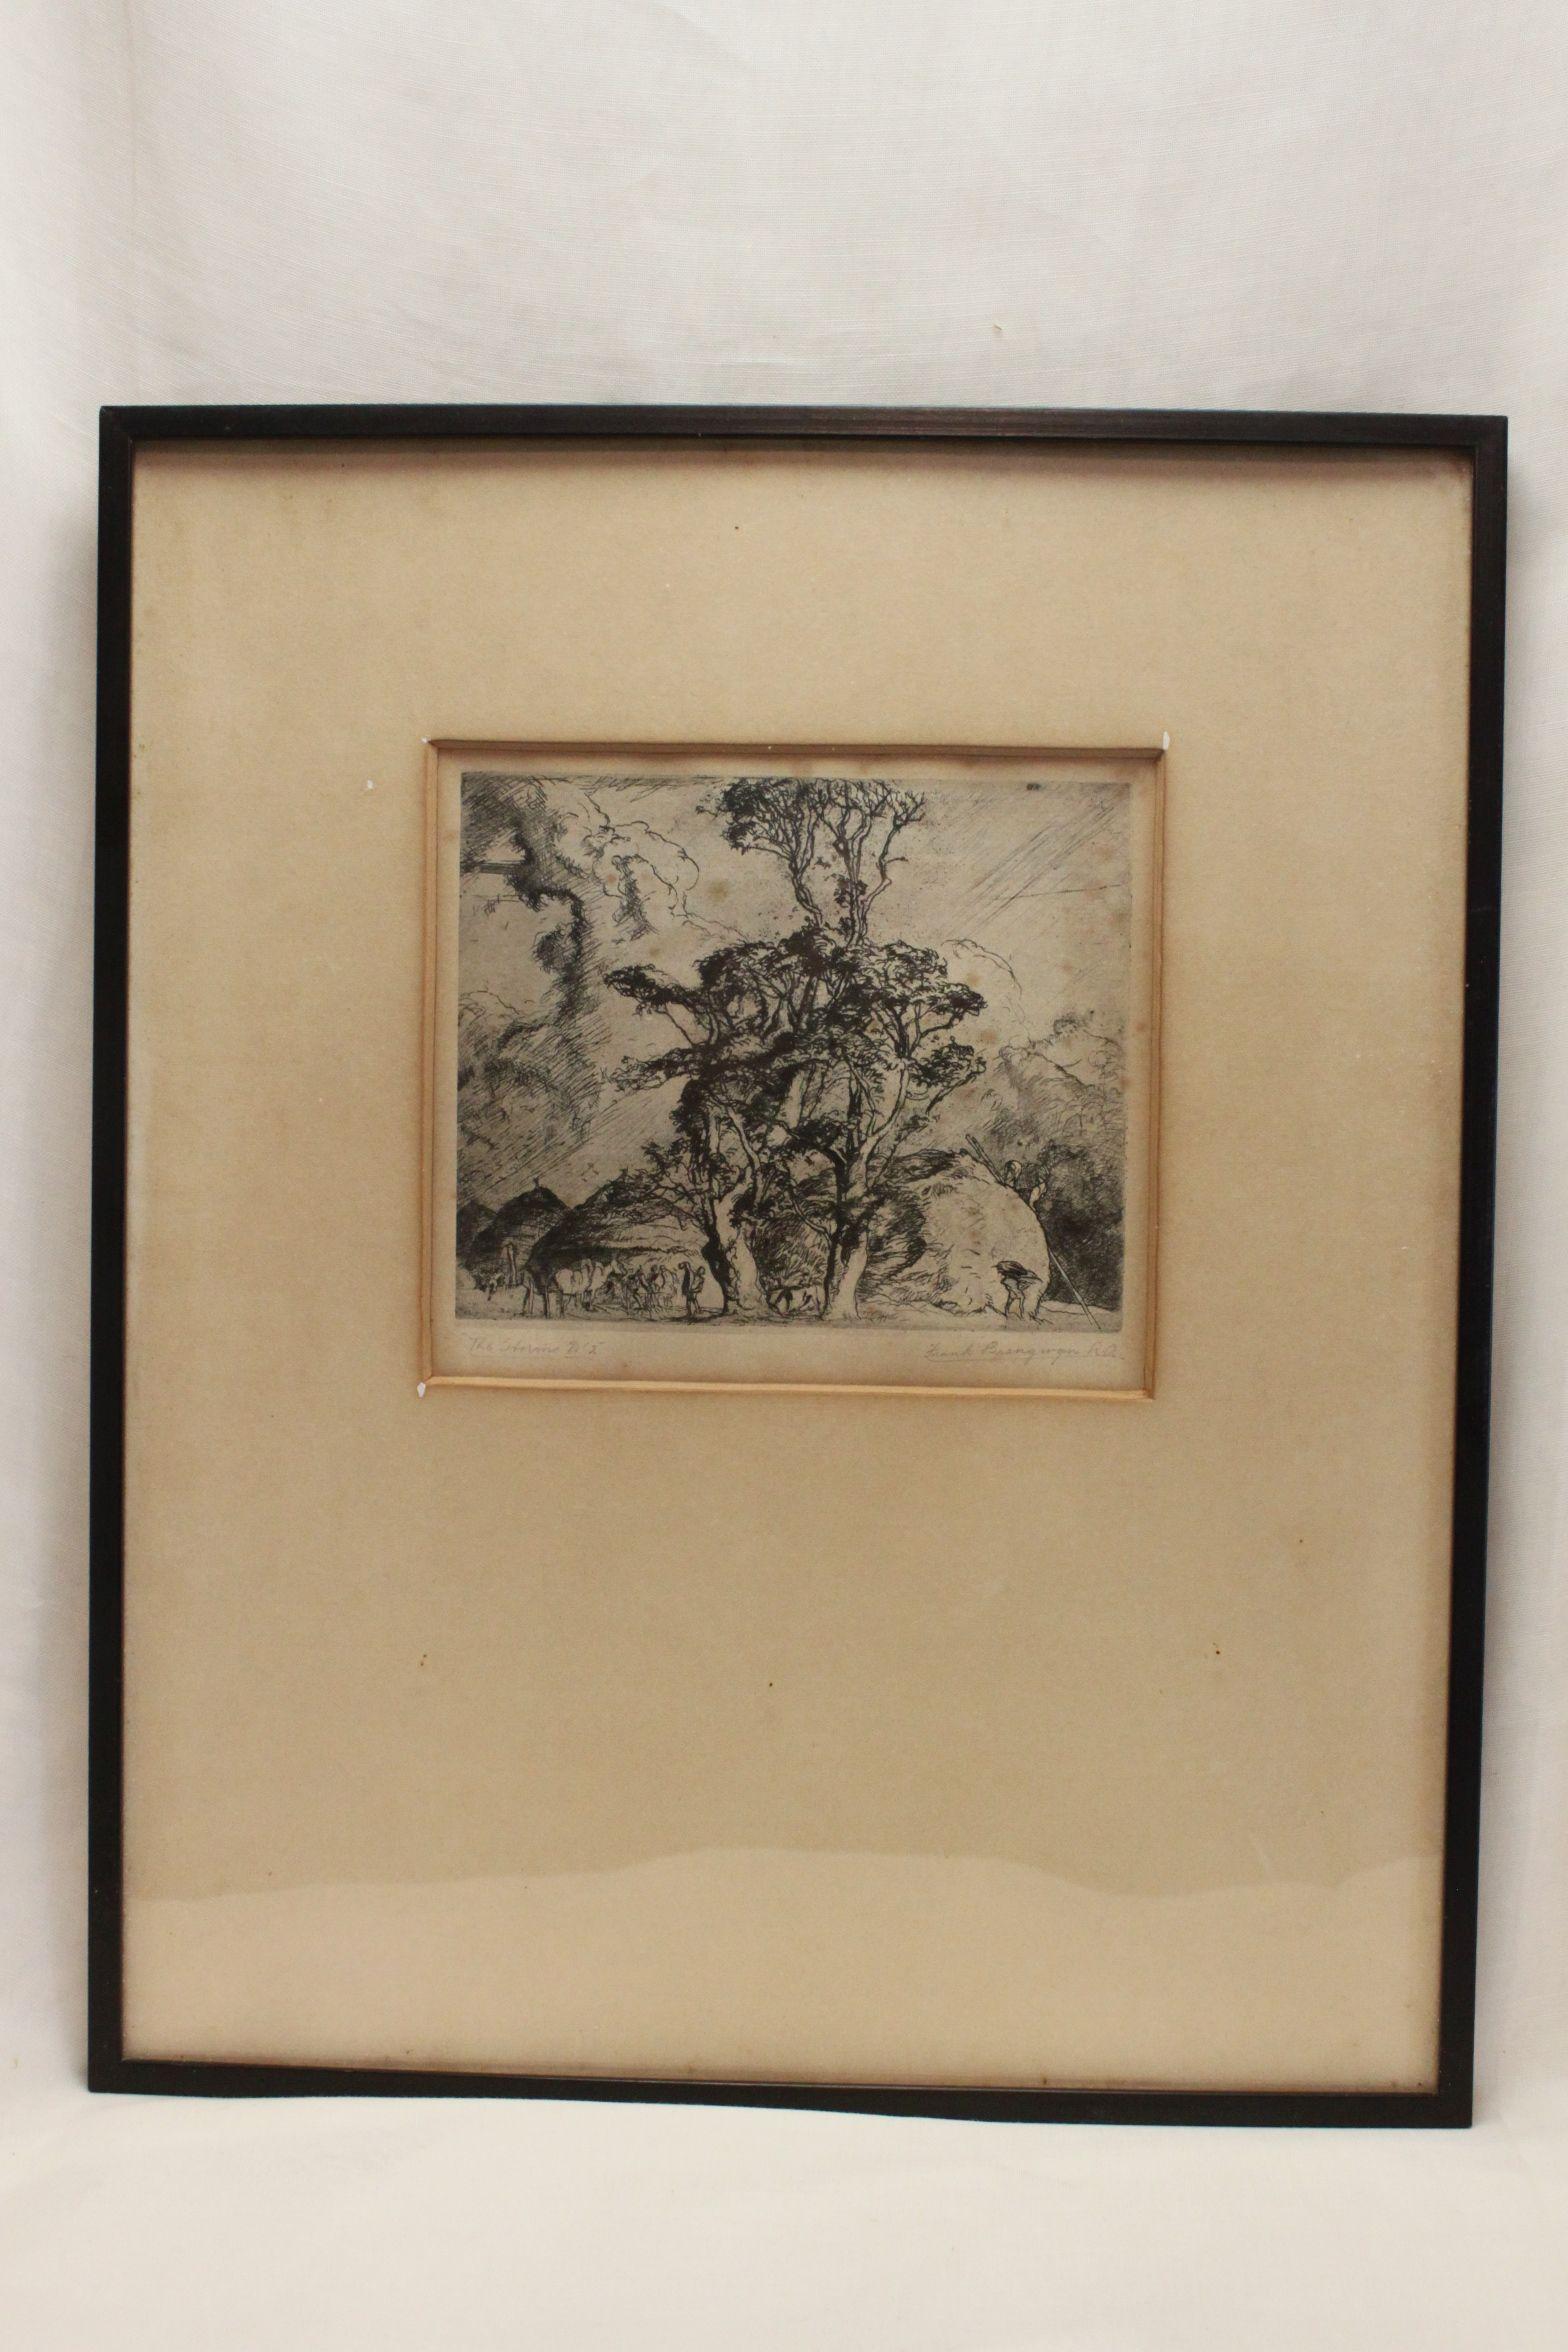 Etching by Frank Brangwyn "The Storm No 2" For Sale